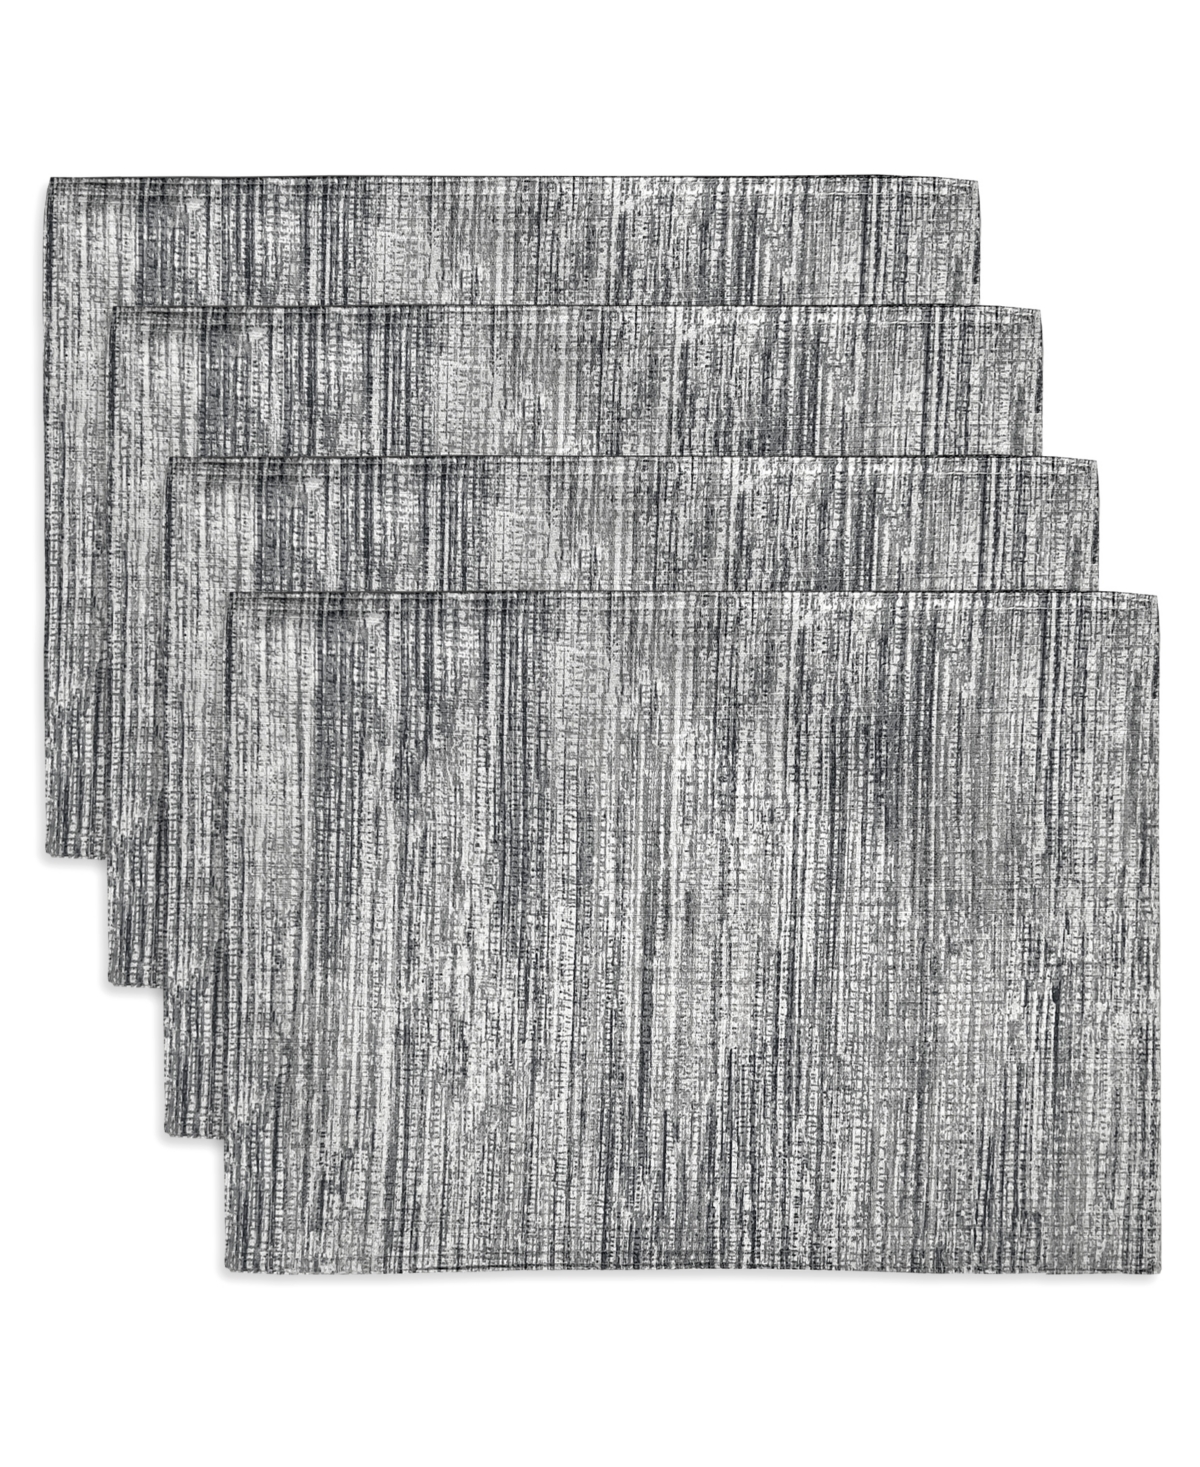 Noritake Colorwave Weave Placemats, 4 Pack In Gray